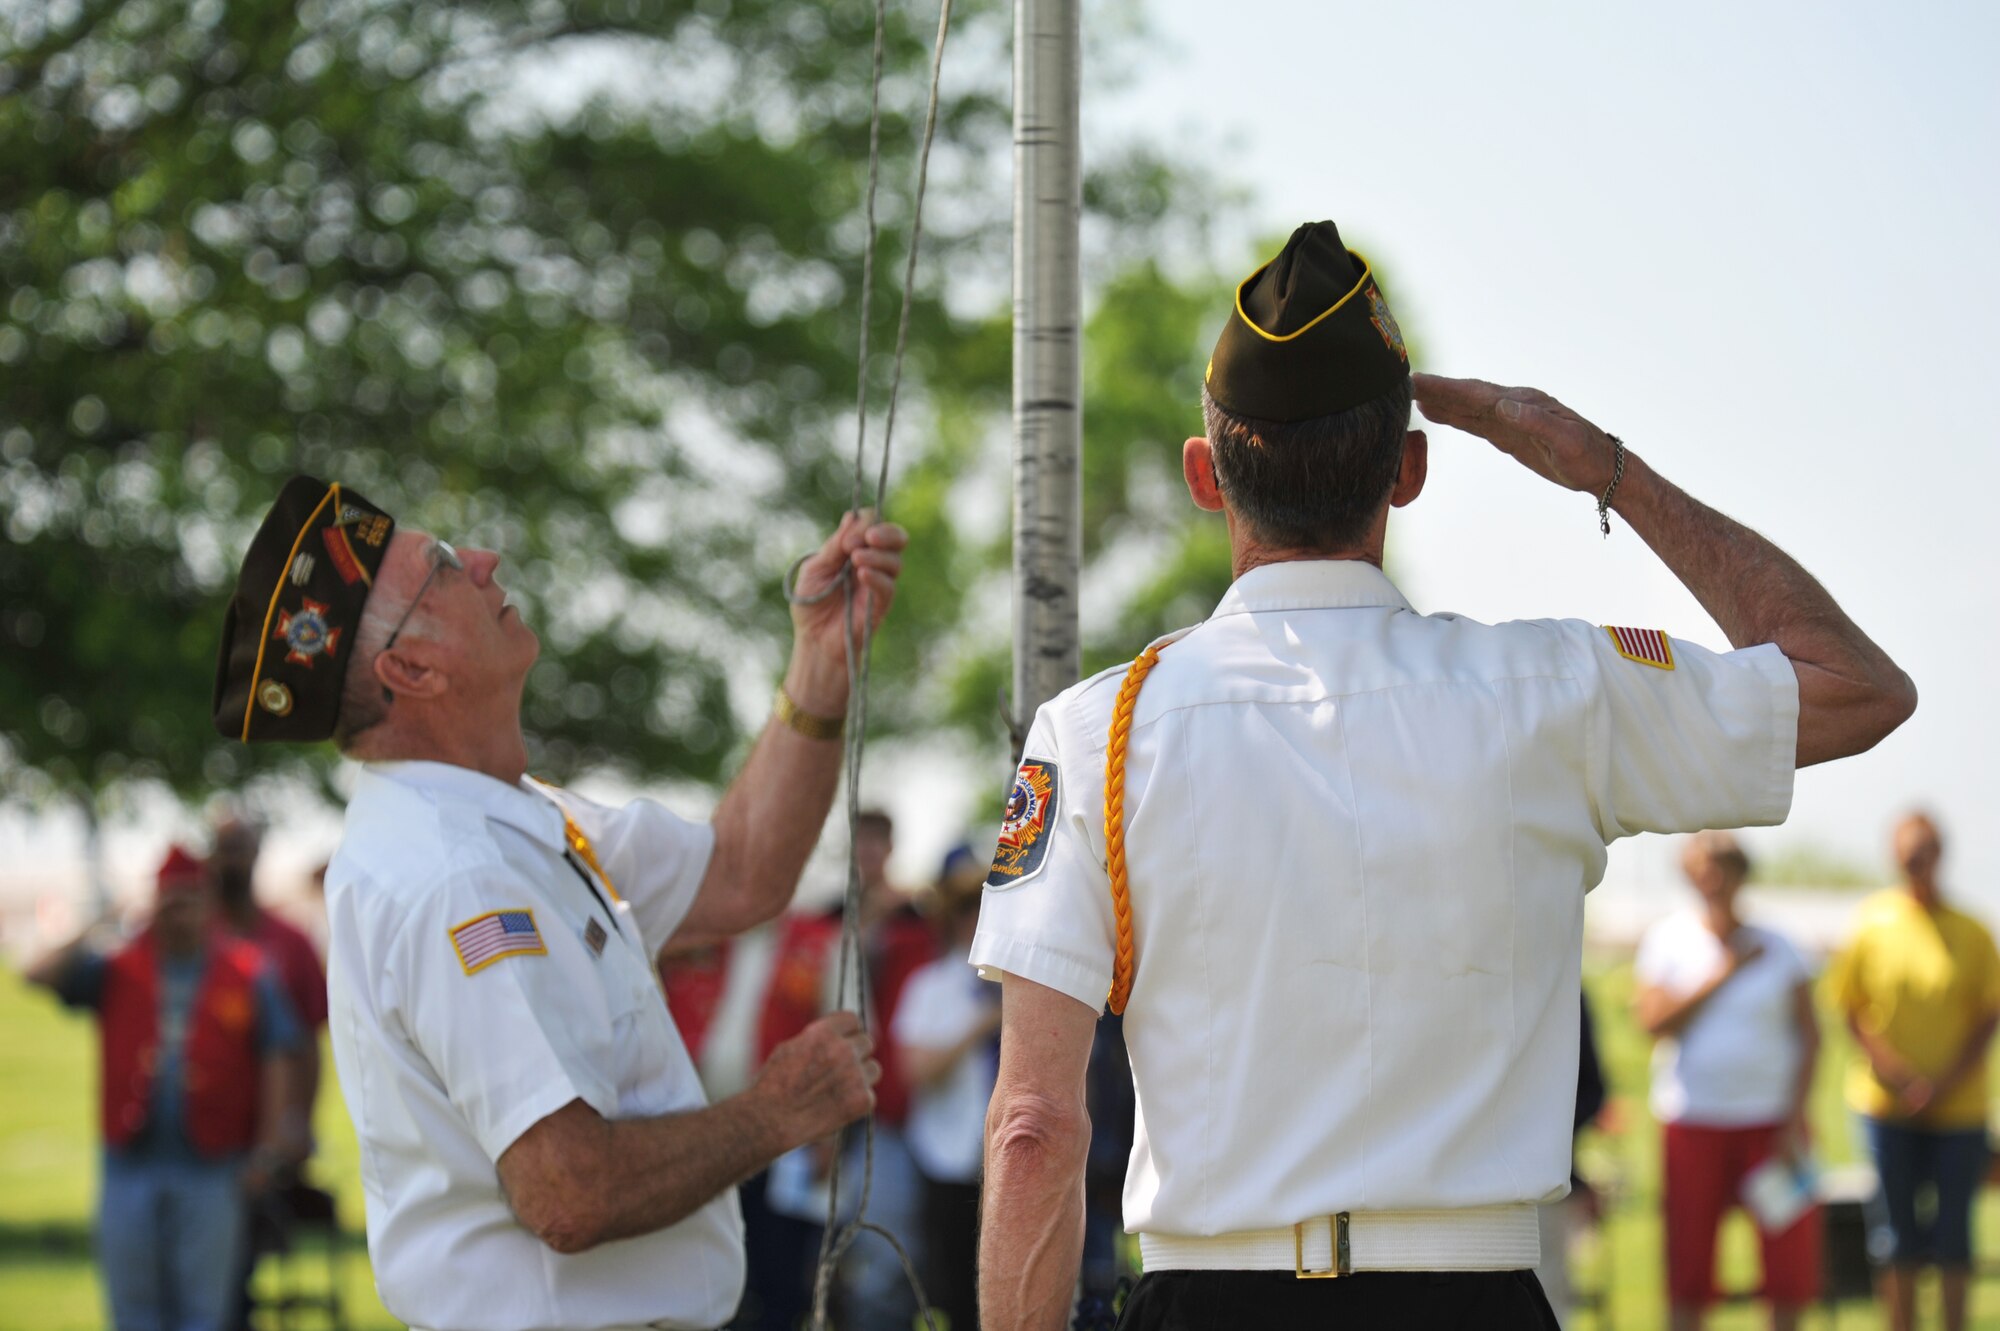 Von Holton, left, and Joe Cochran, local Veterans of Foreign Wars members, lower the flag during the 25th annual wreath-laying ceremony for 2nd Lt. George Whiteman May 18, 2013, in Sedalia, Mo. Both Holton and Cochran have attended many of the ceremonies honoring Whiteman, a pilot who was one of the first Airmen to die during World War II. (U.S. Air Force photo by Senior Airman Brigitte N. Brantley/Released)